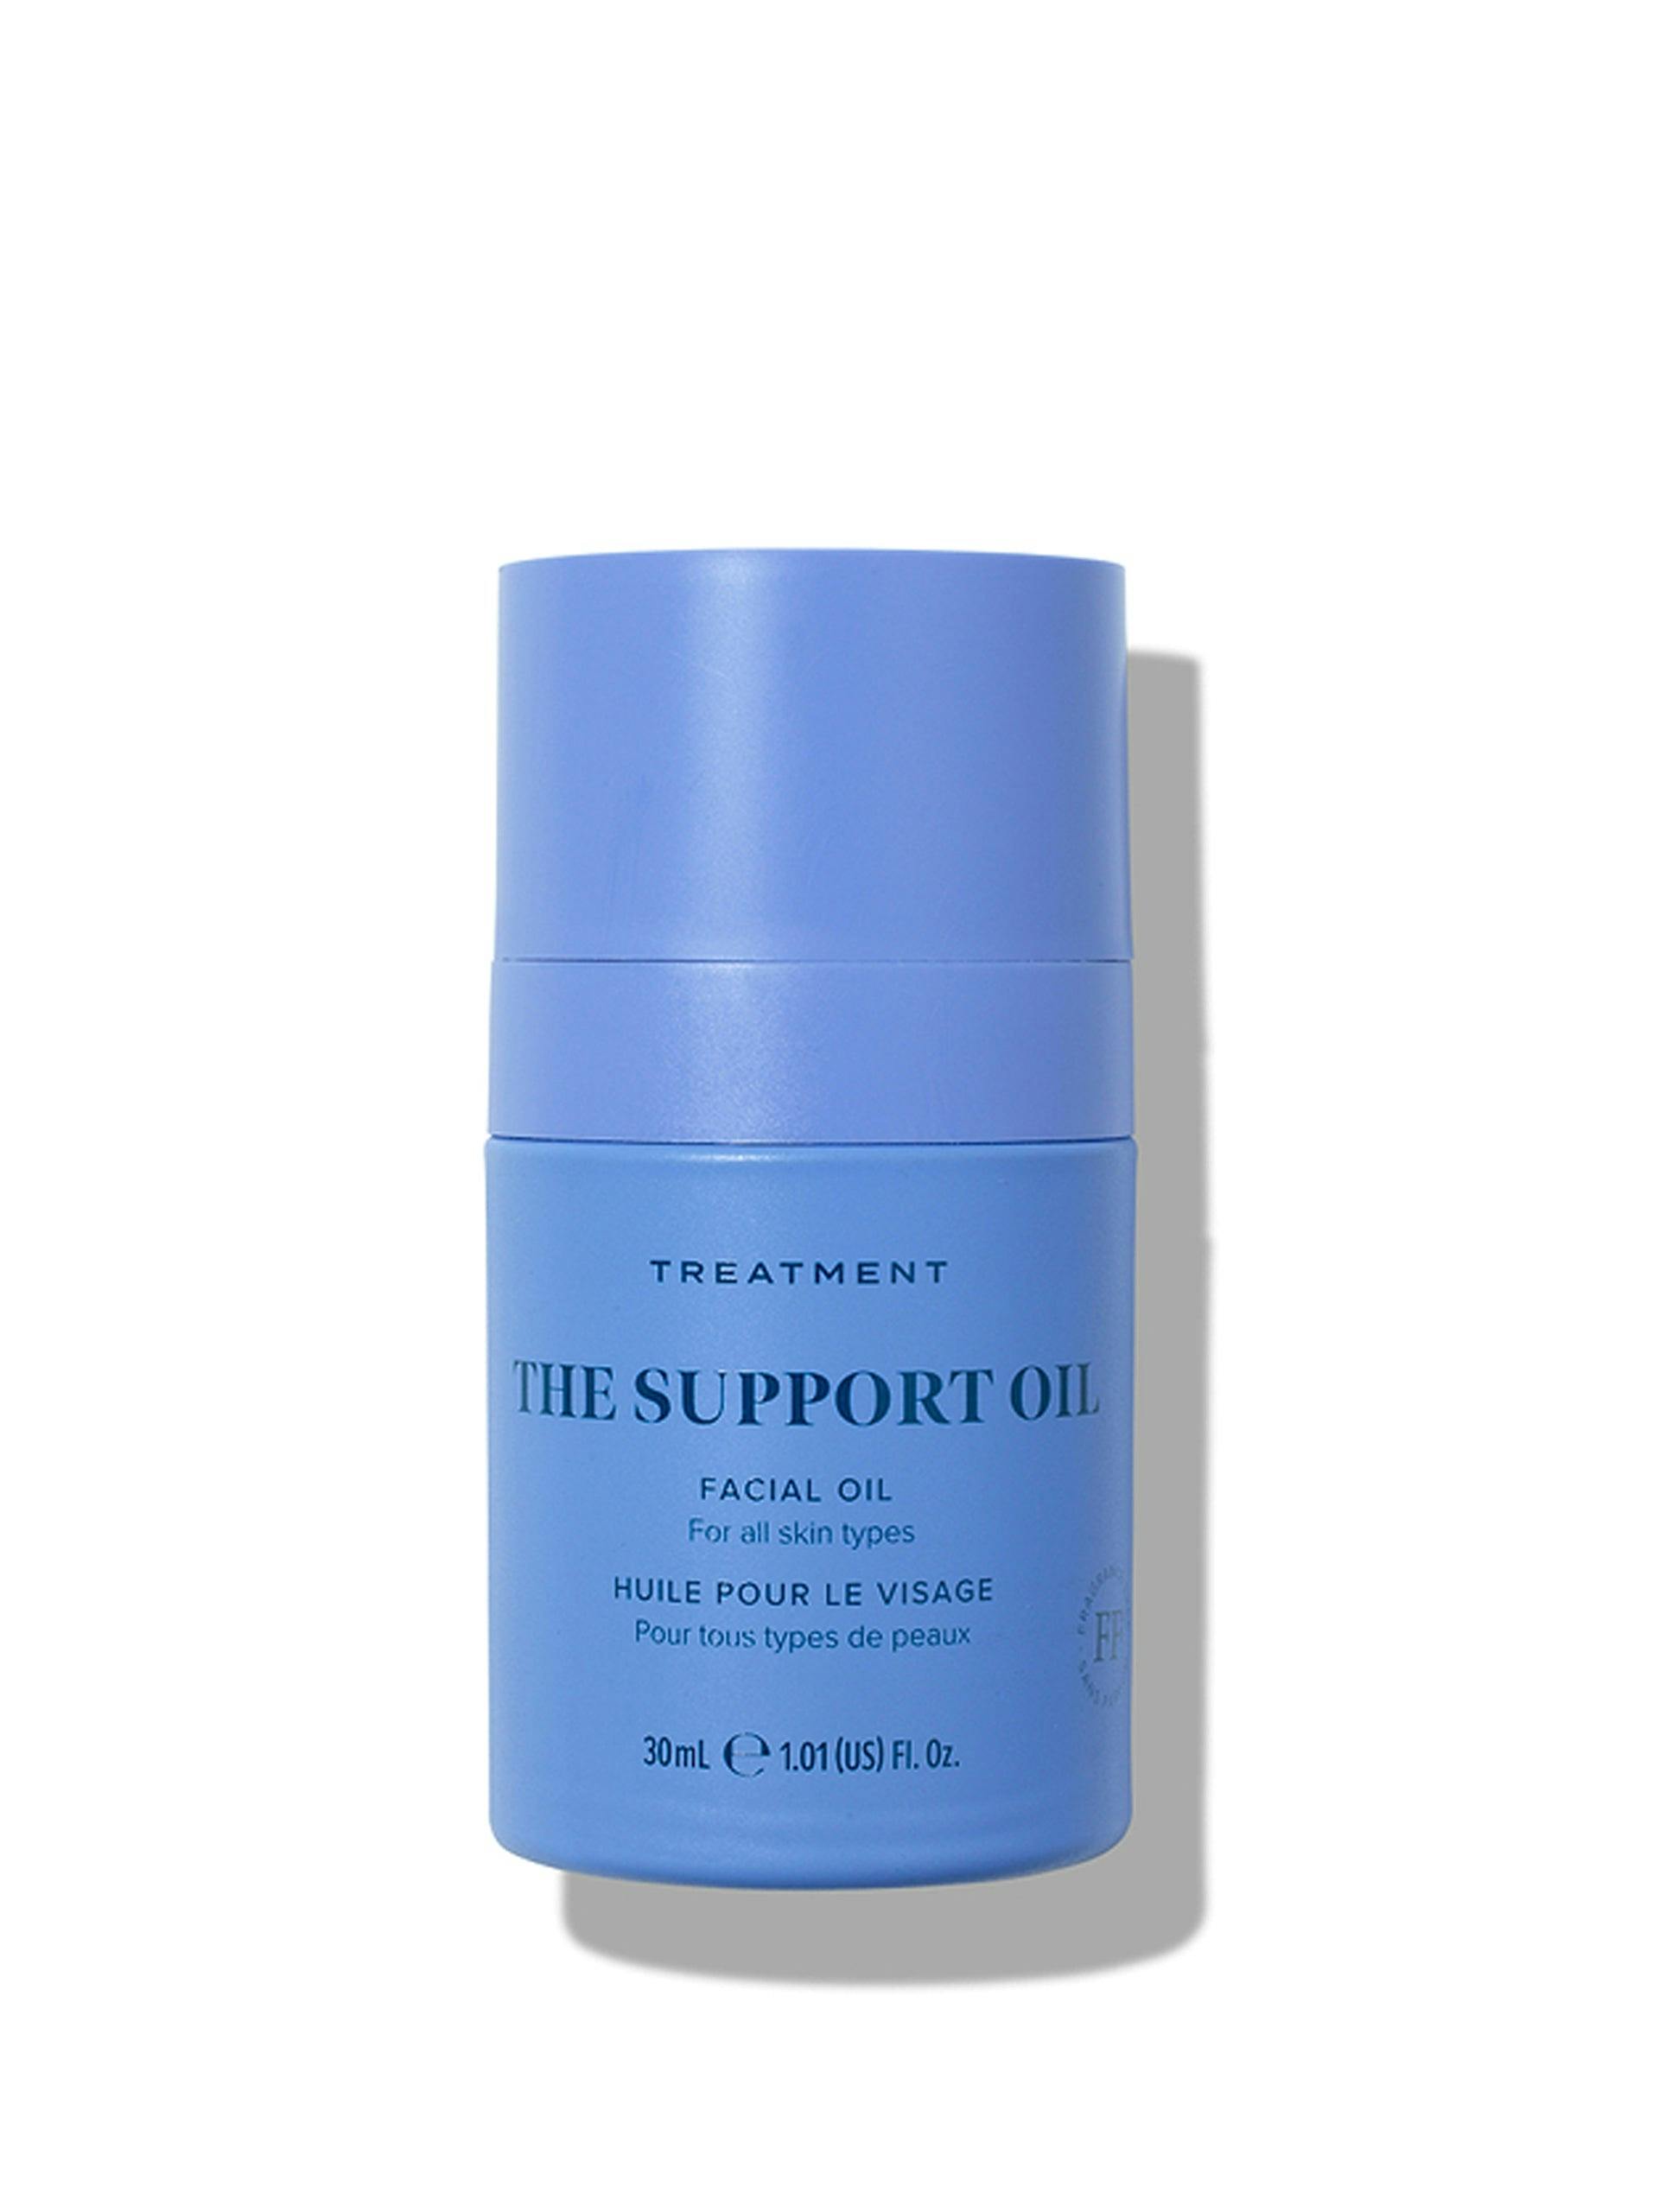 The Support Oil facial oil